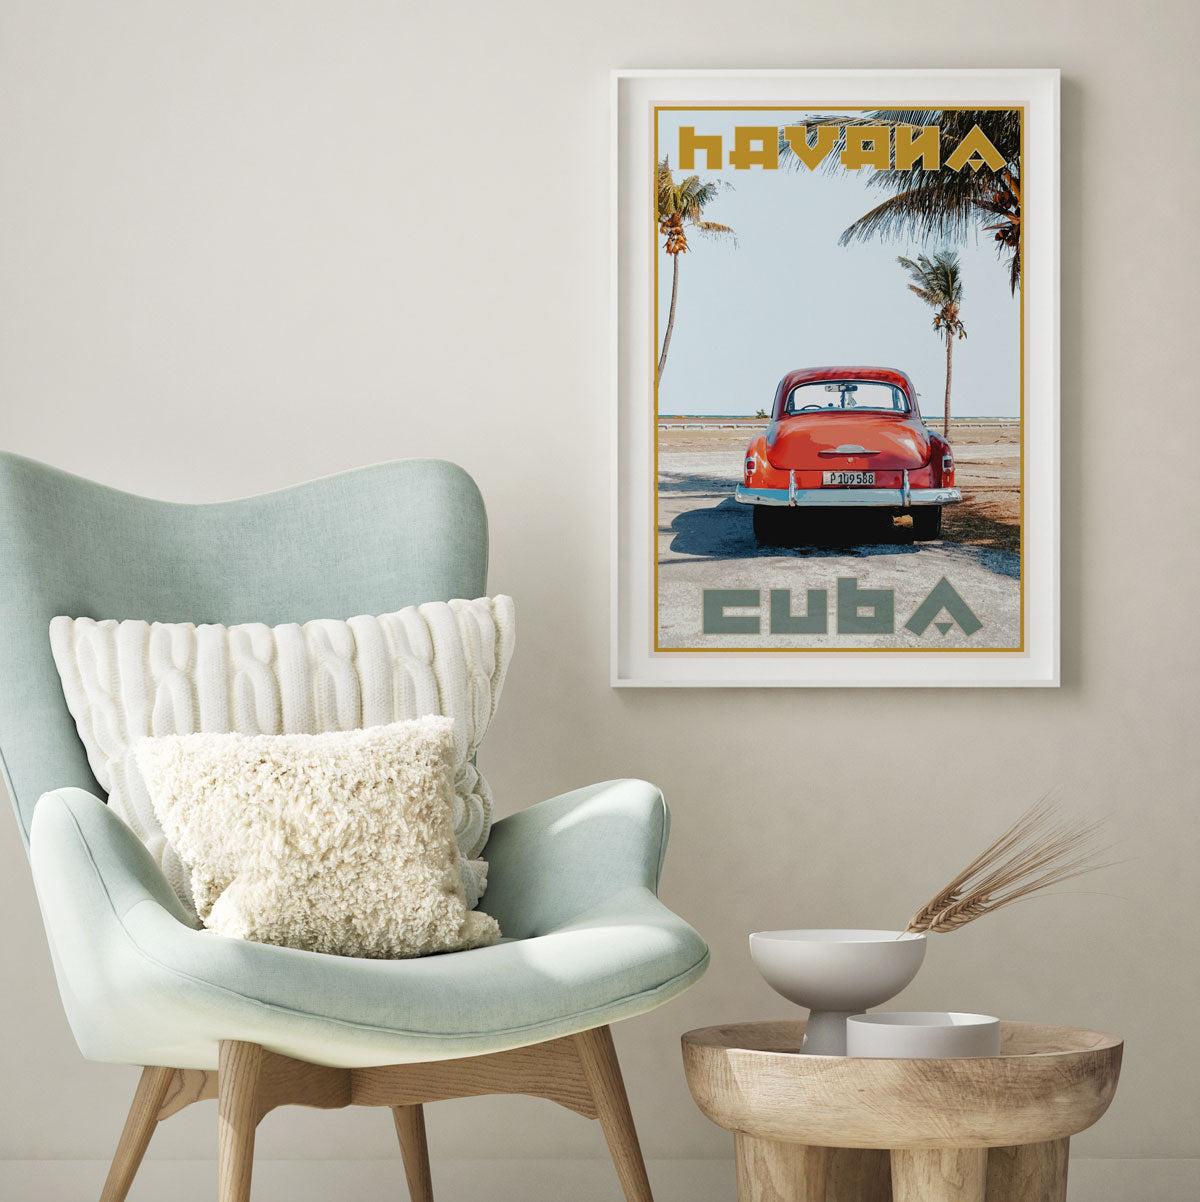 Cuba vintage travel style white framed print by places we luv